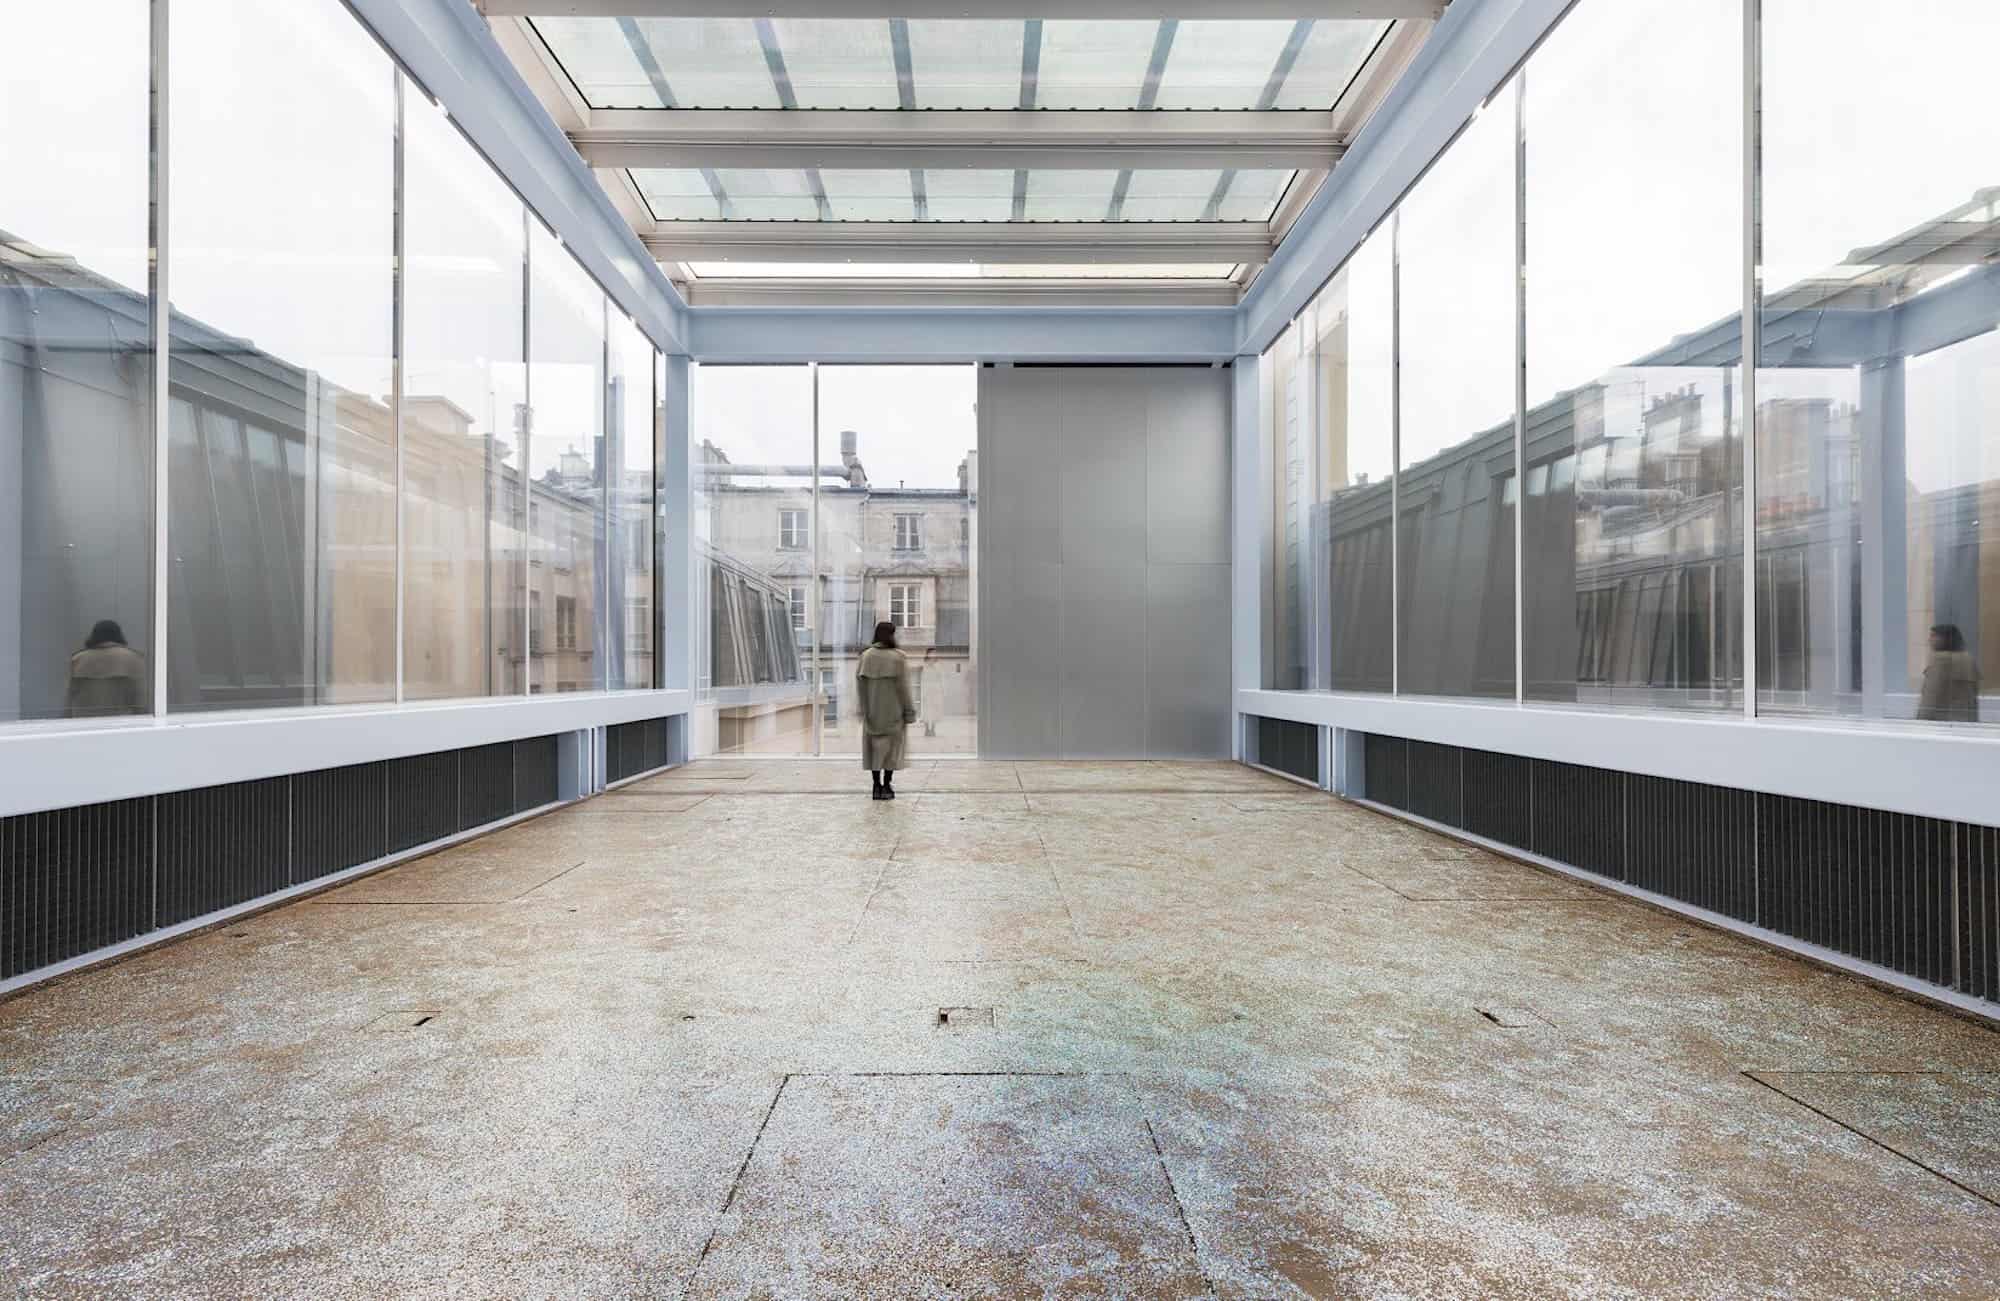 Commissioned by Galeries Lafayette department store, this new contemporary art space in Paris is airy and has views of the Paris rooftops.